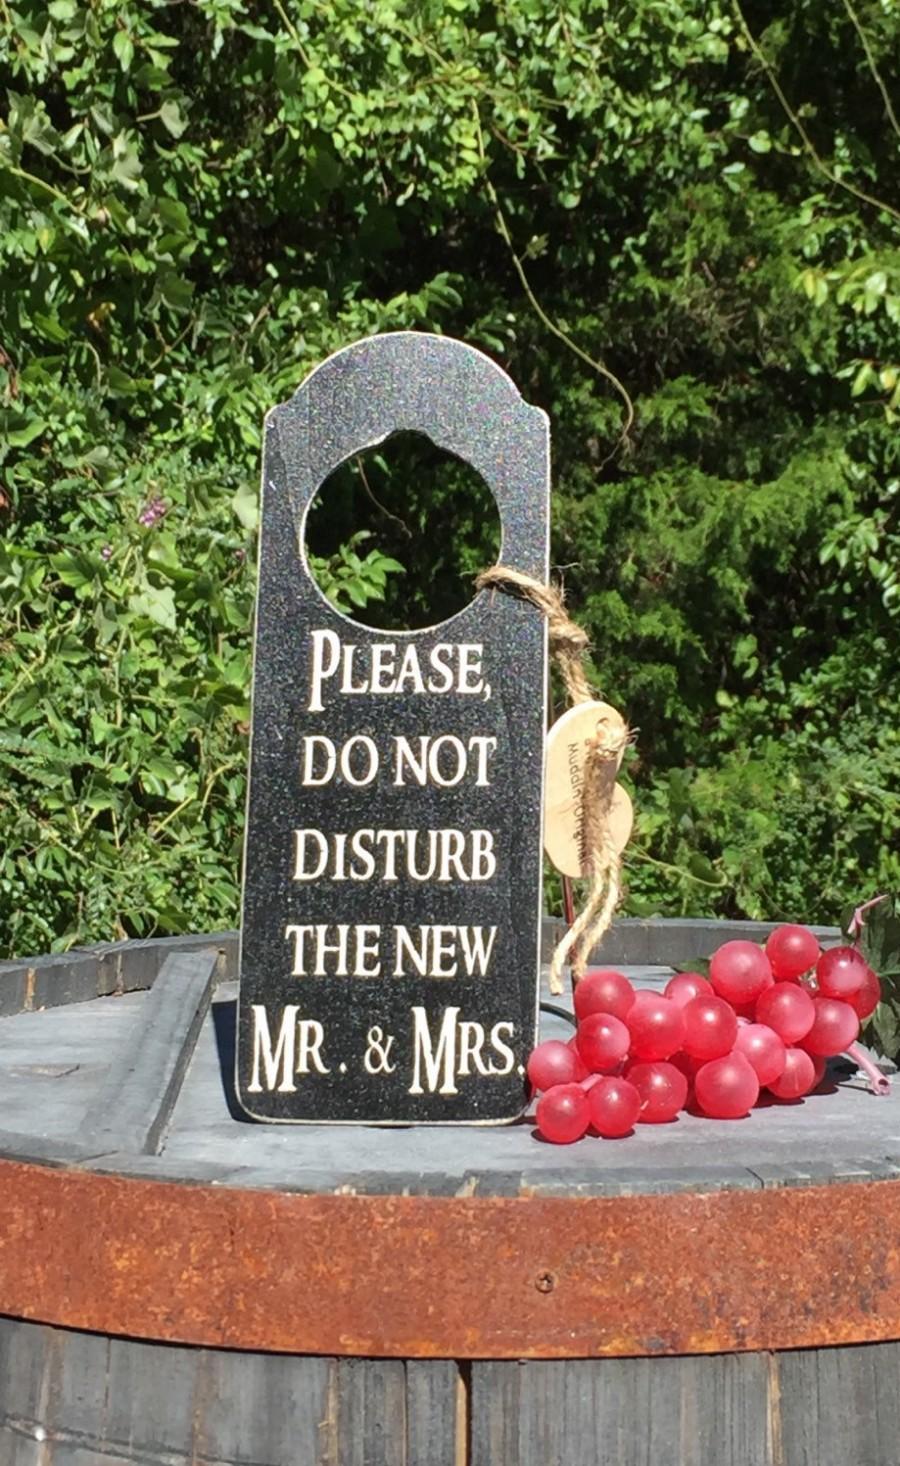 Mariage - Please, Do not disturb the new Mr. and Mrs.© Rustic Distressed Farmhouse Style Painted Wood Wedding Night Door Hanger Heart Gift Tag - $9.99 USD